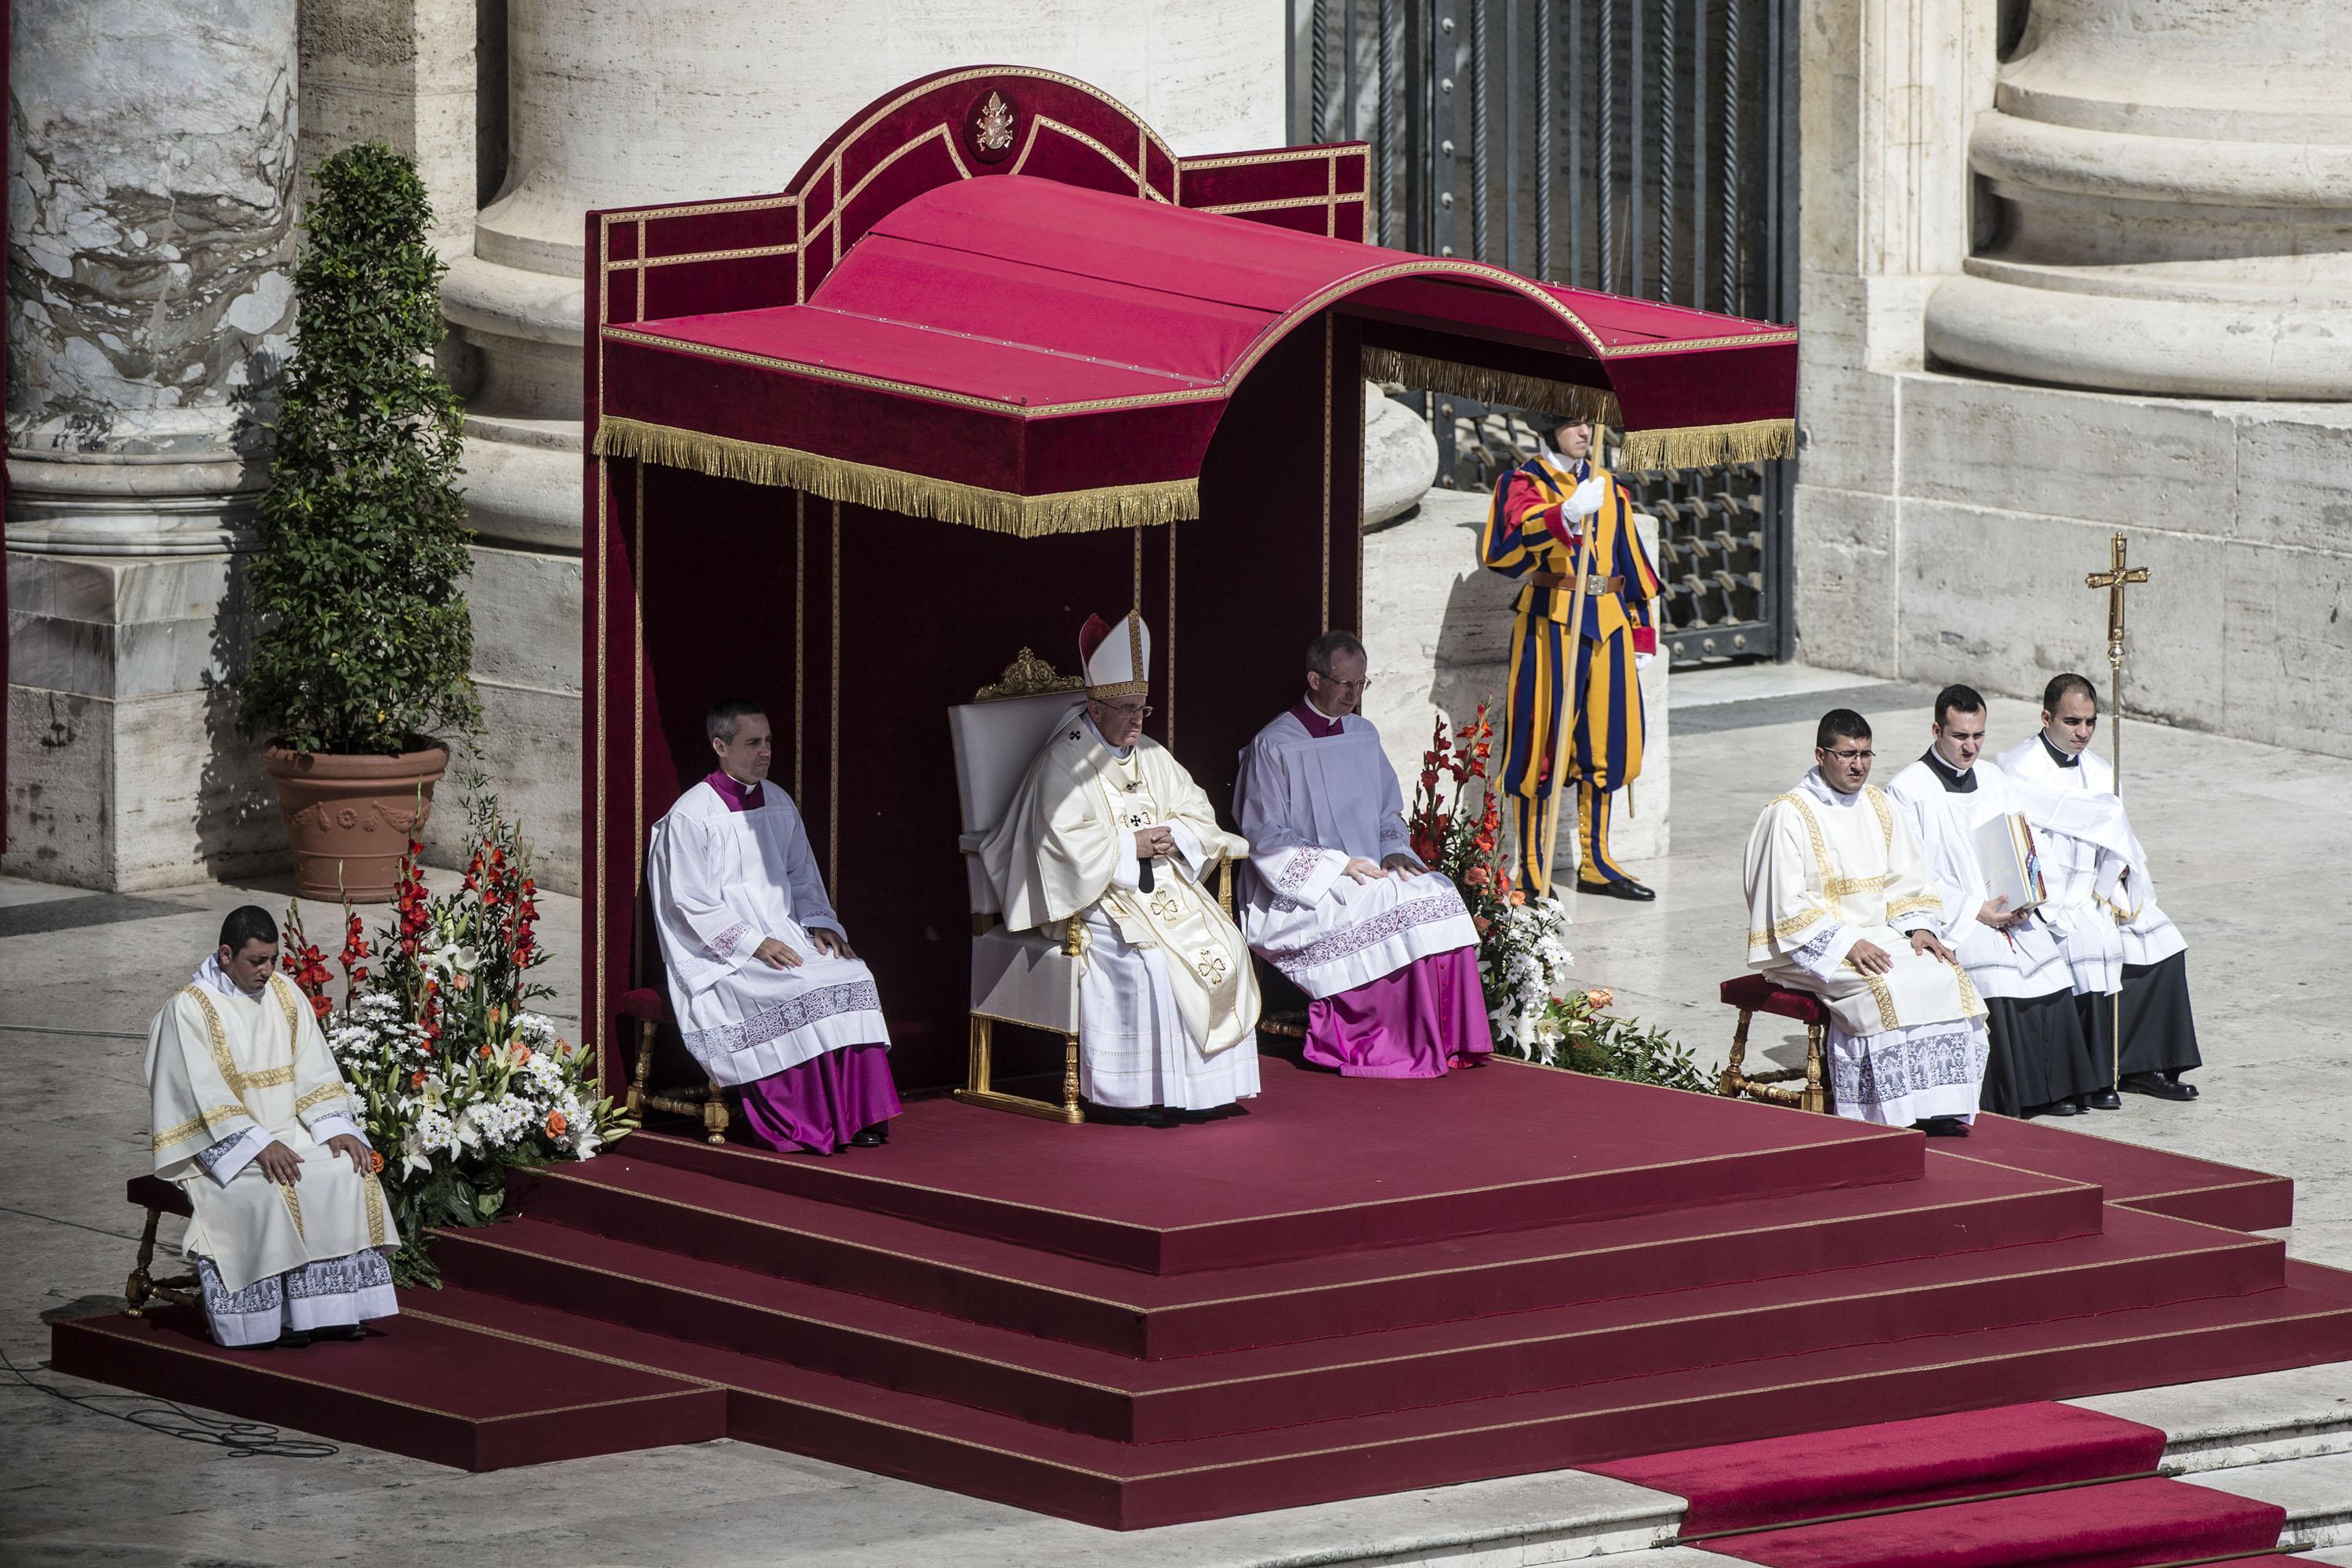 Pope Francis leading the canonization ceremony of four new saints in St. Peter's Square